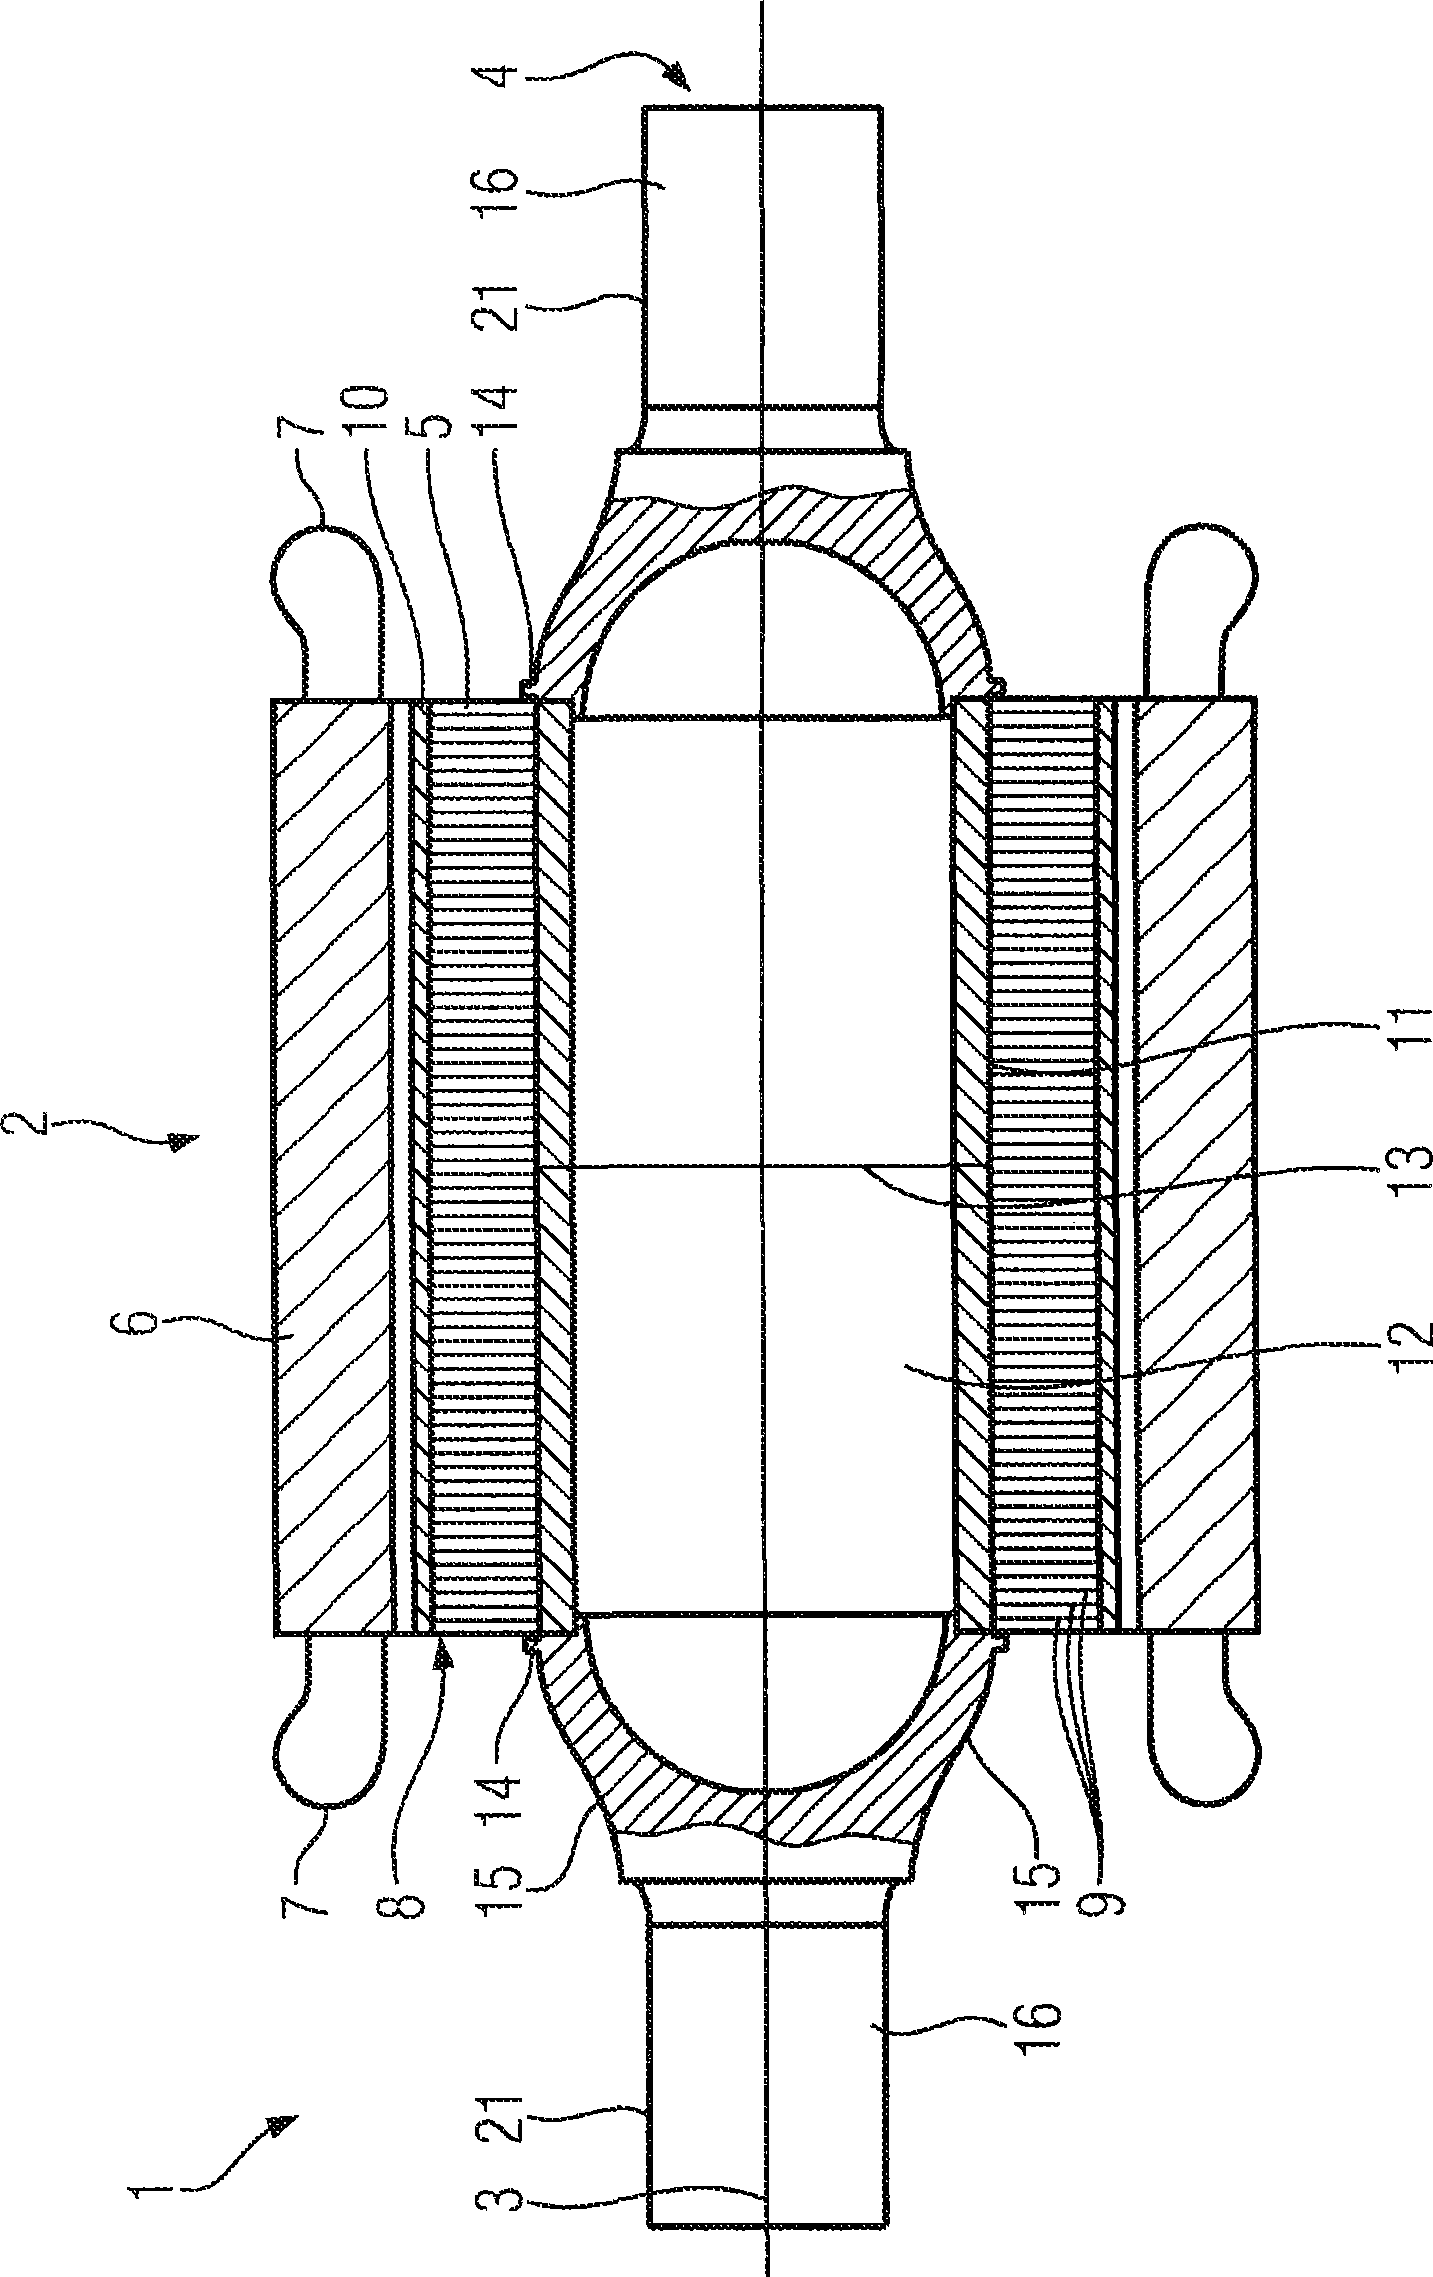 Wheel set shaft for an electric drive unit mounted on the axle and drive unit